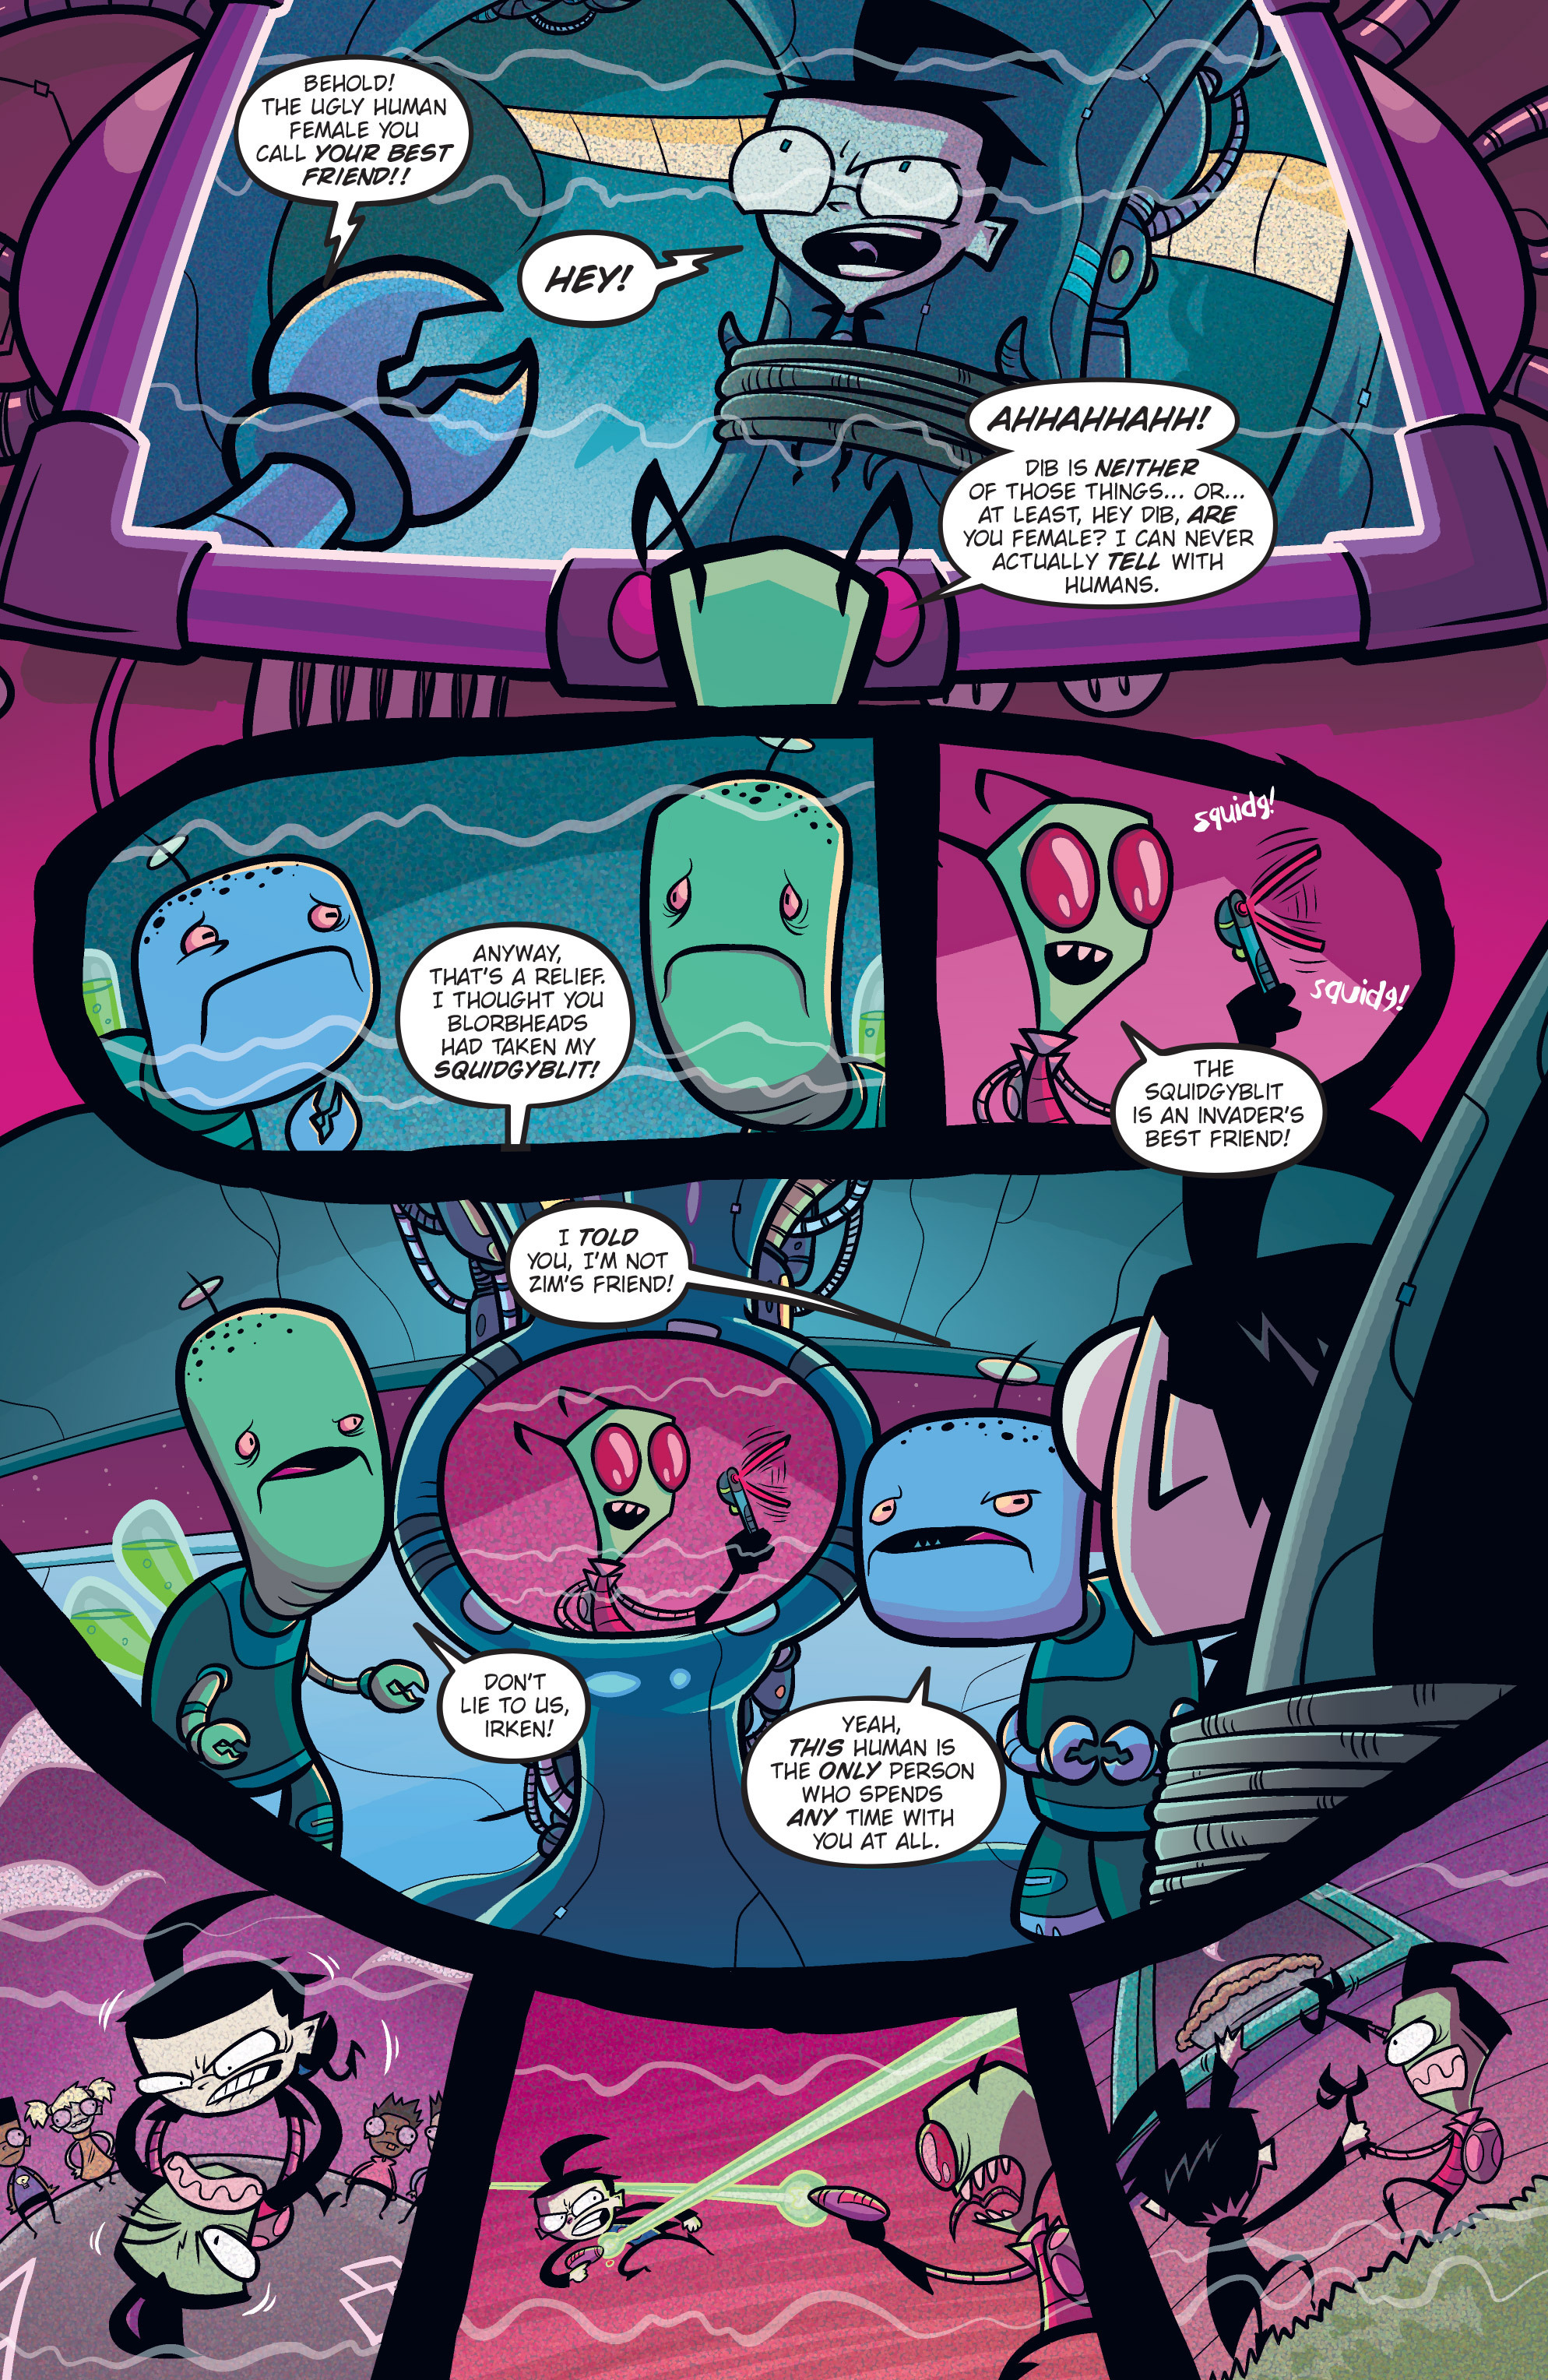 Invader Zim (2015-): Chapter 13 - Page 4